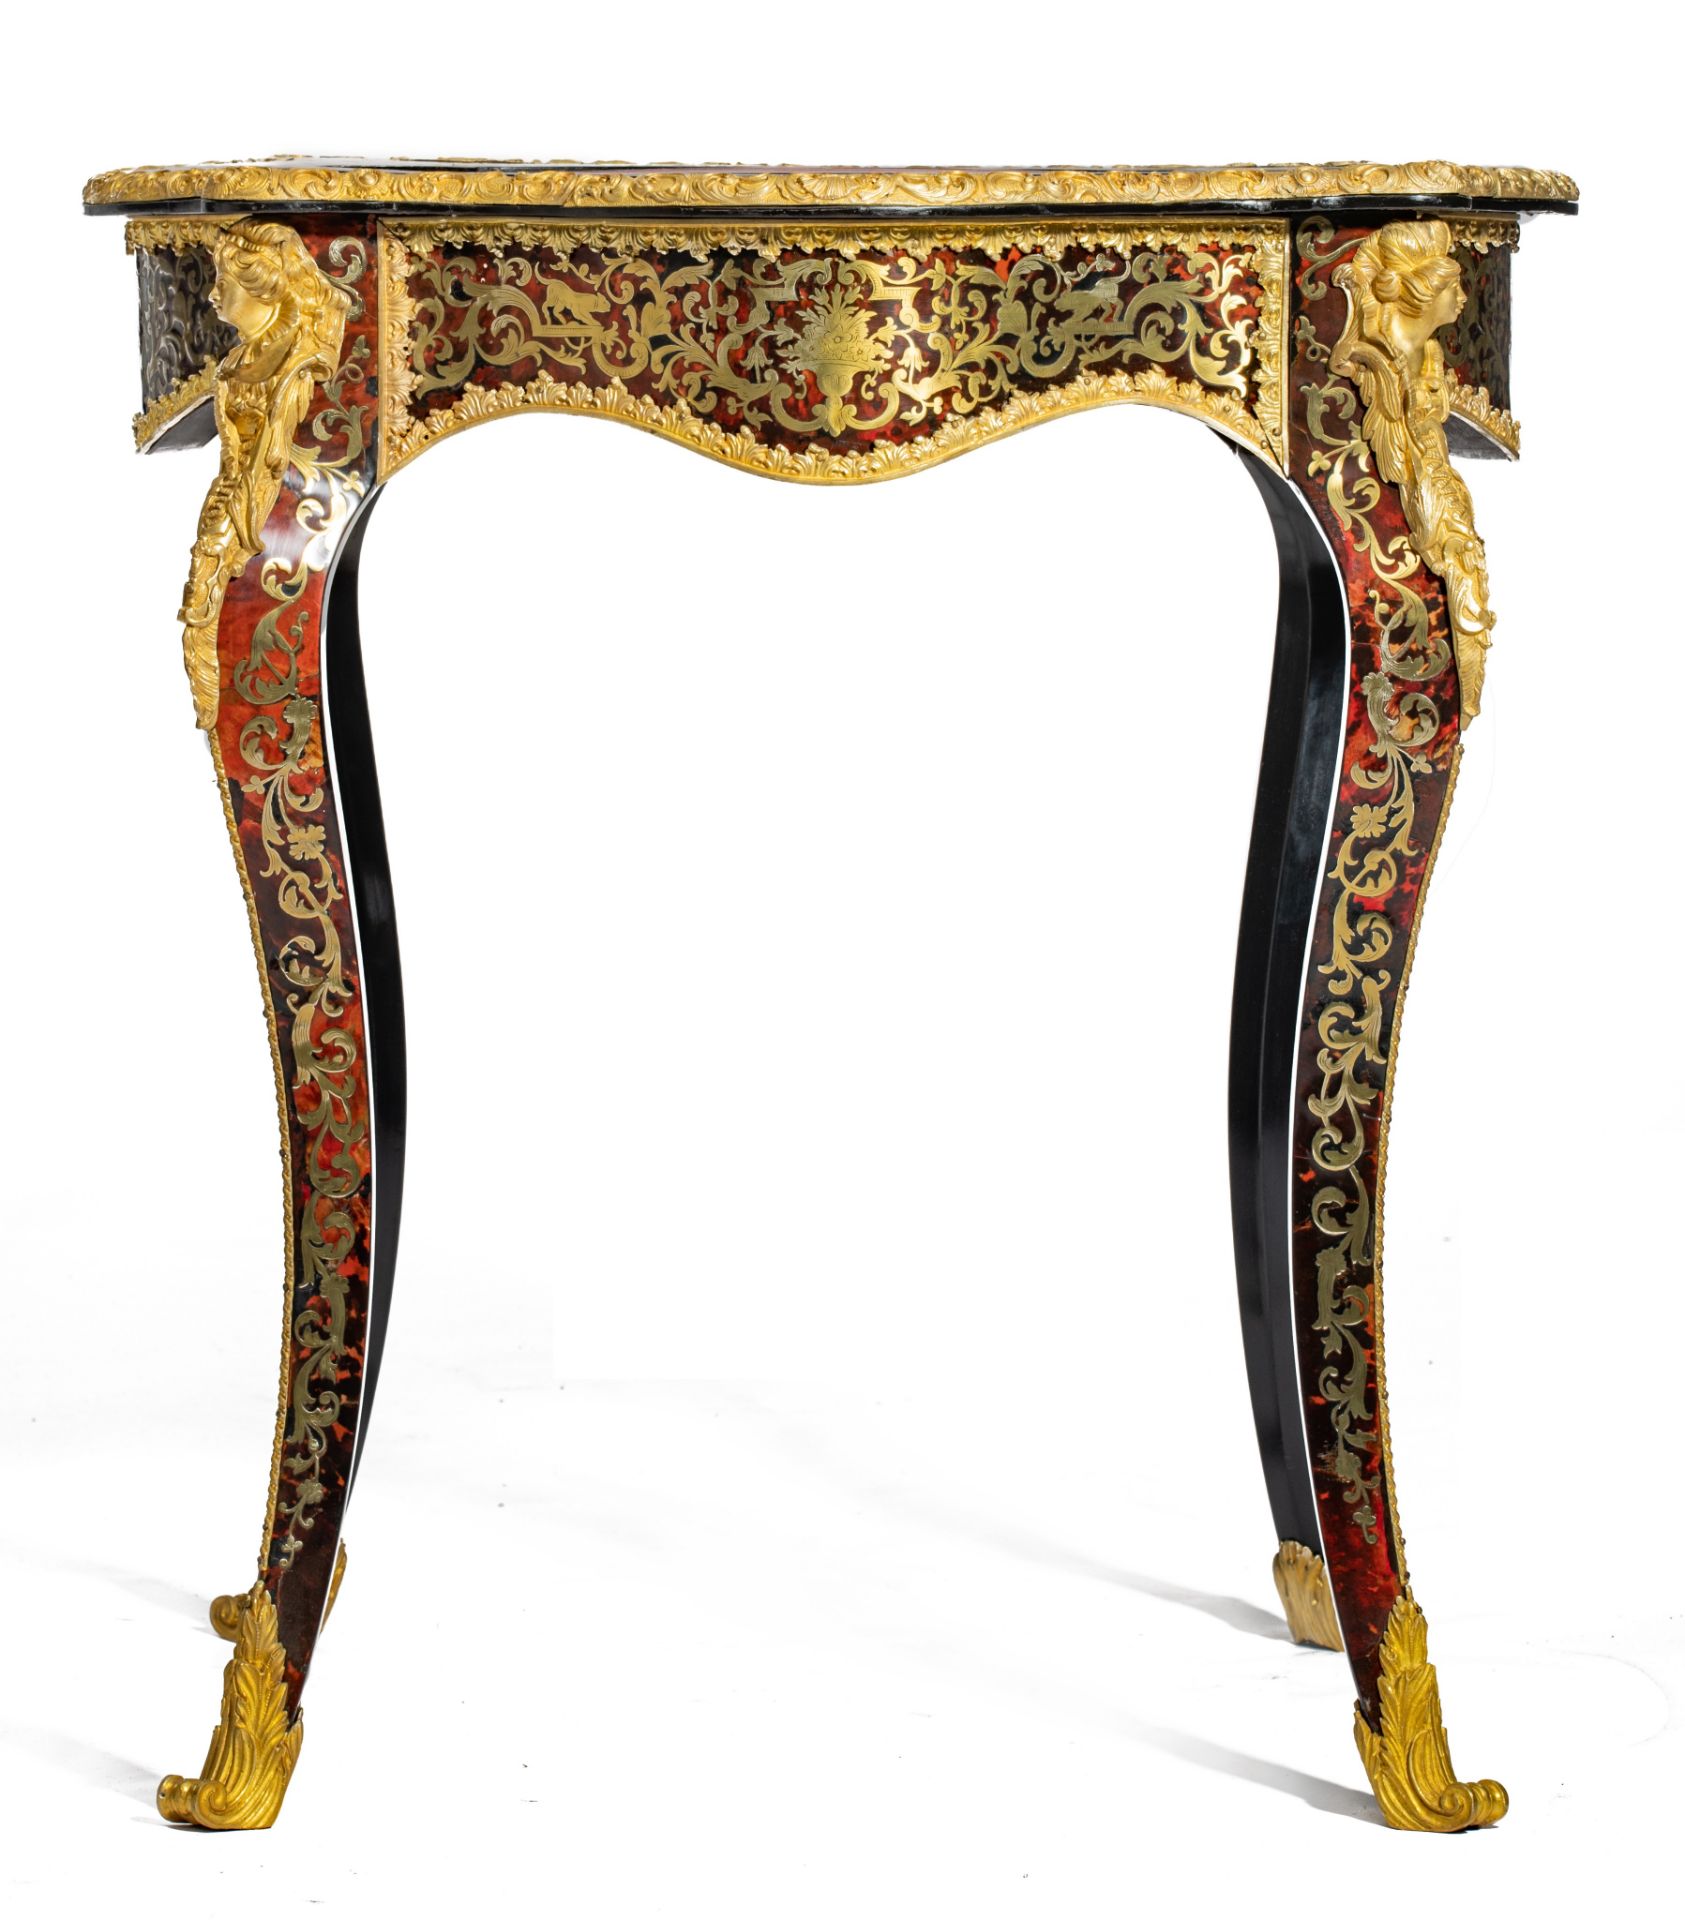 A fine Napoleon III Boulle work games table, with gilt bronze mounts and a red leather inlaid playin - Image 5 of 11